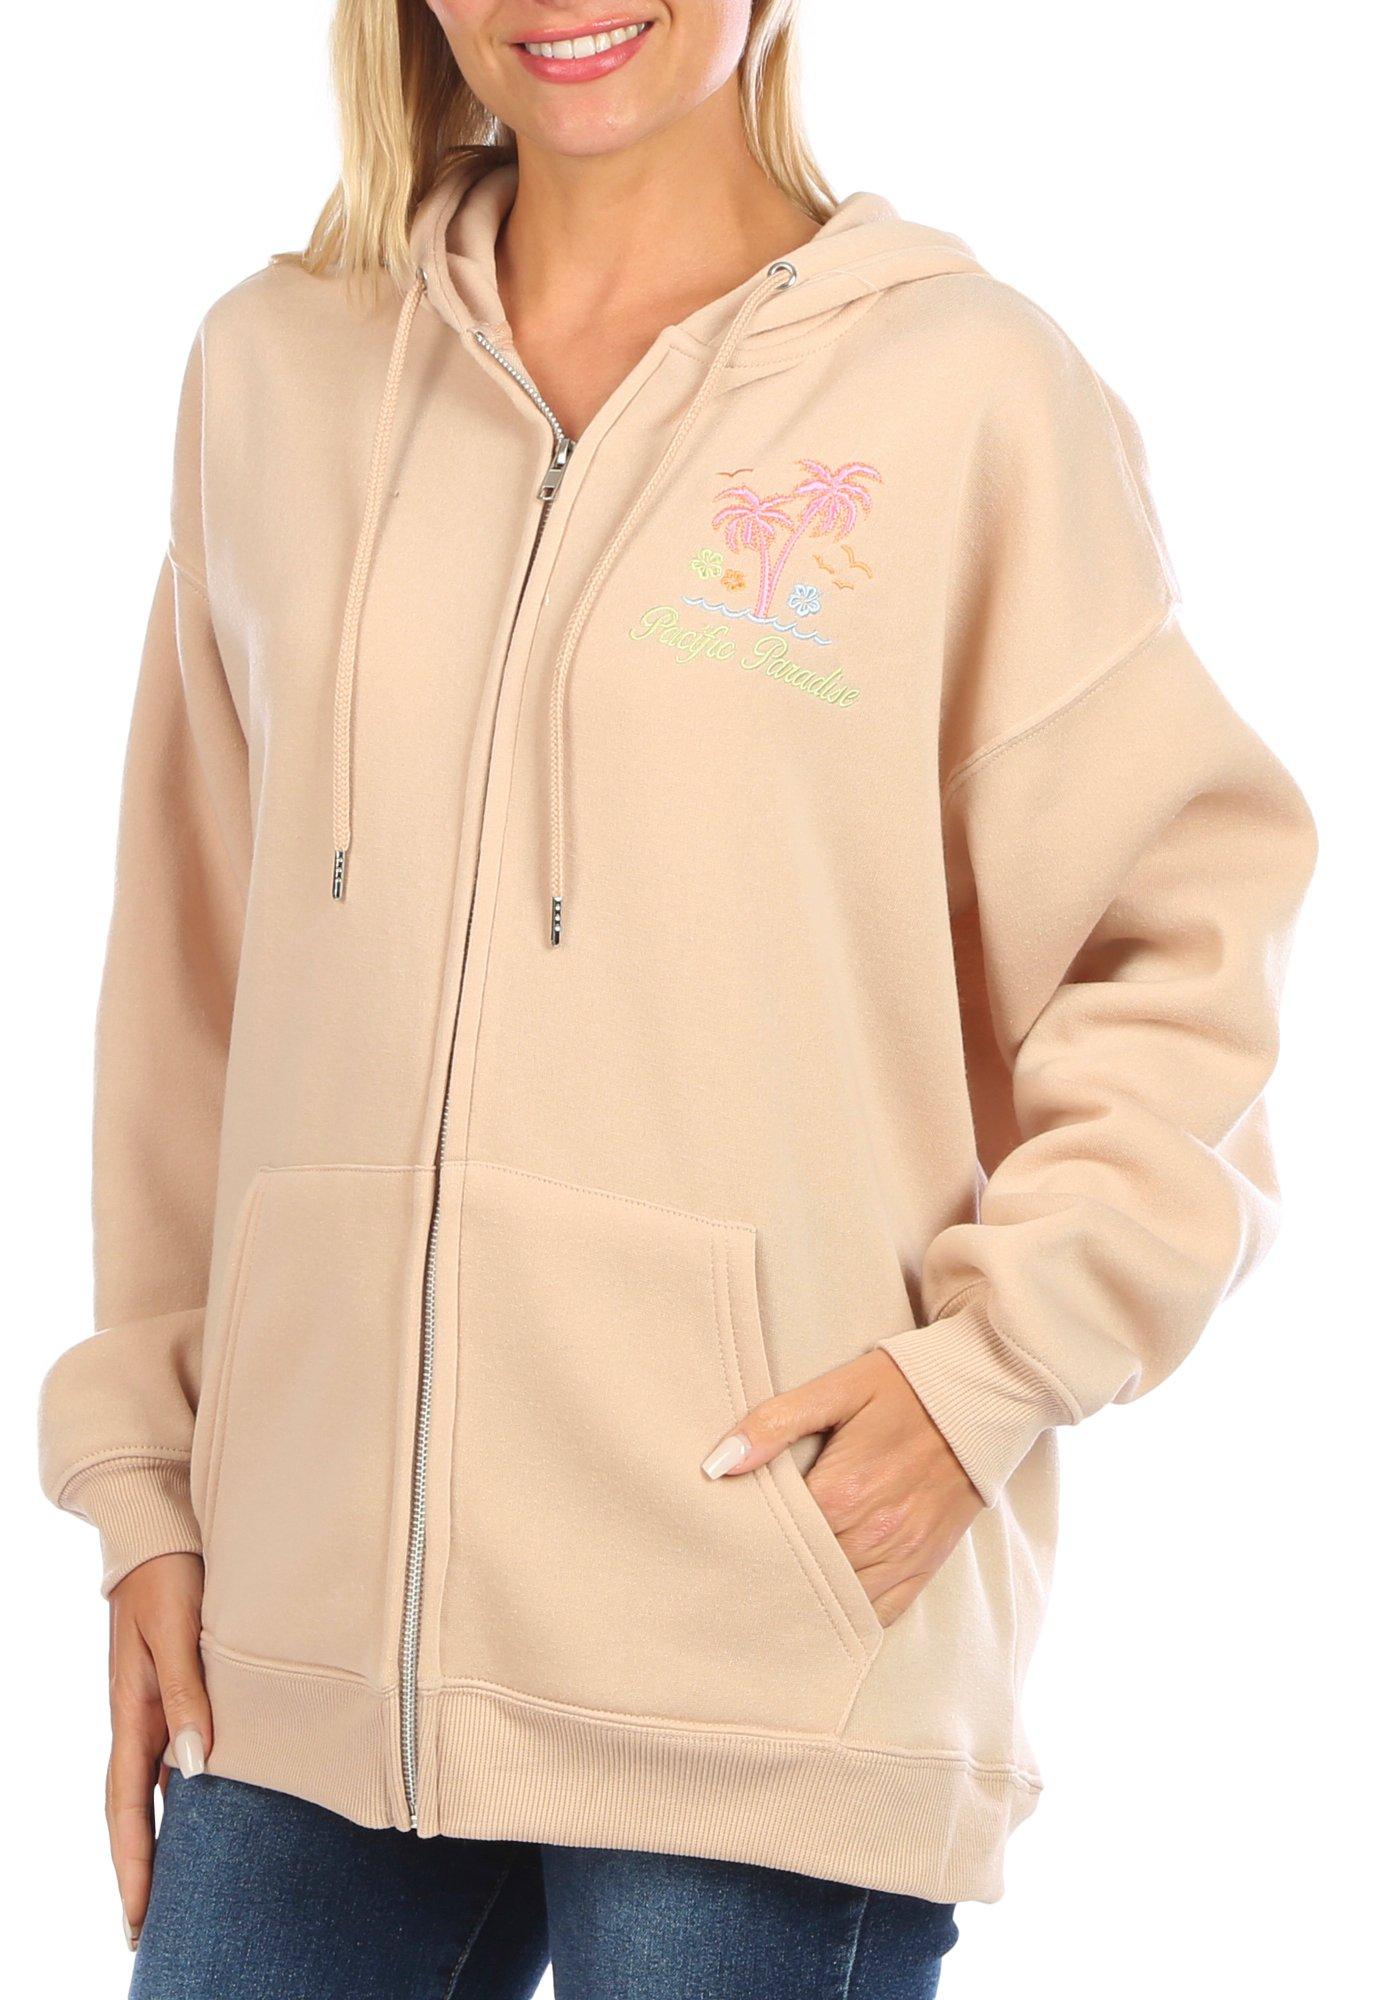 Juniors Embroidered Front Zip Hooded Jacket